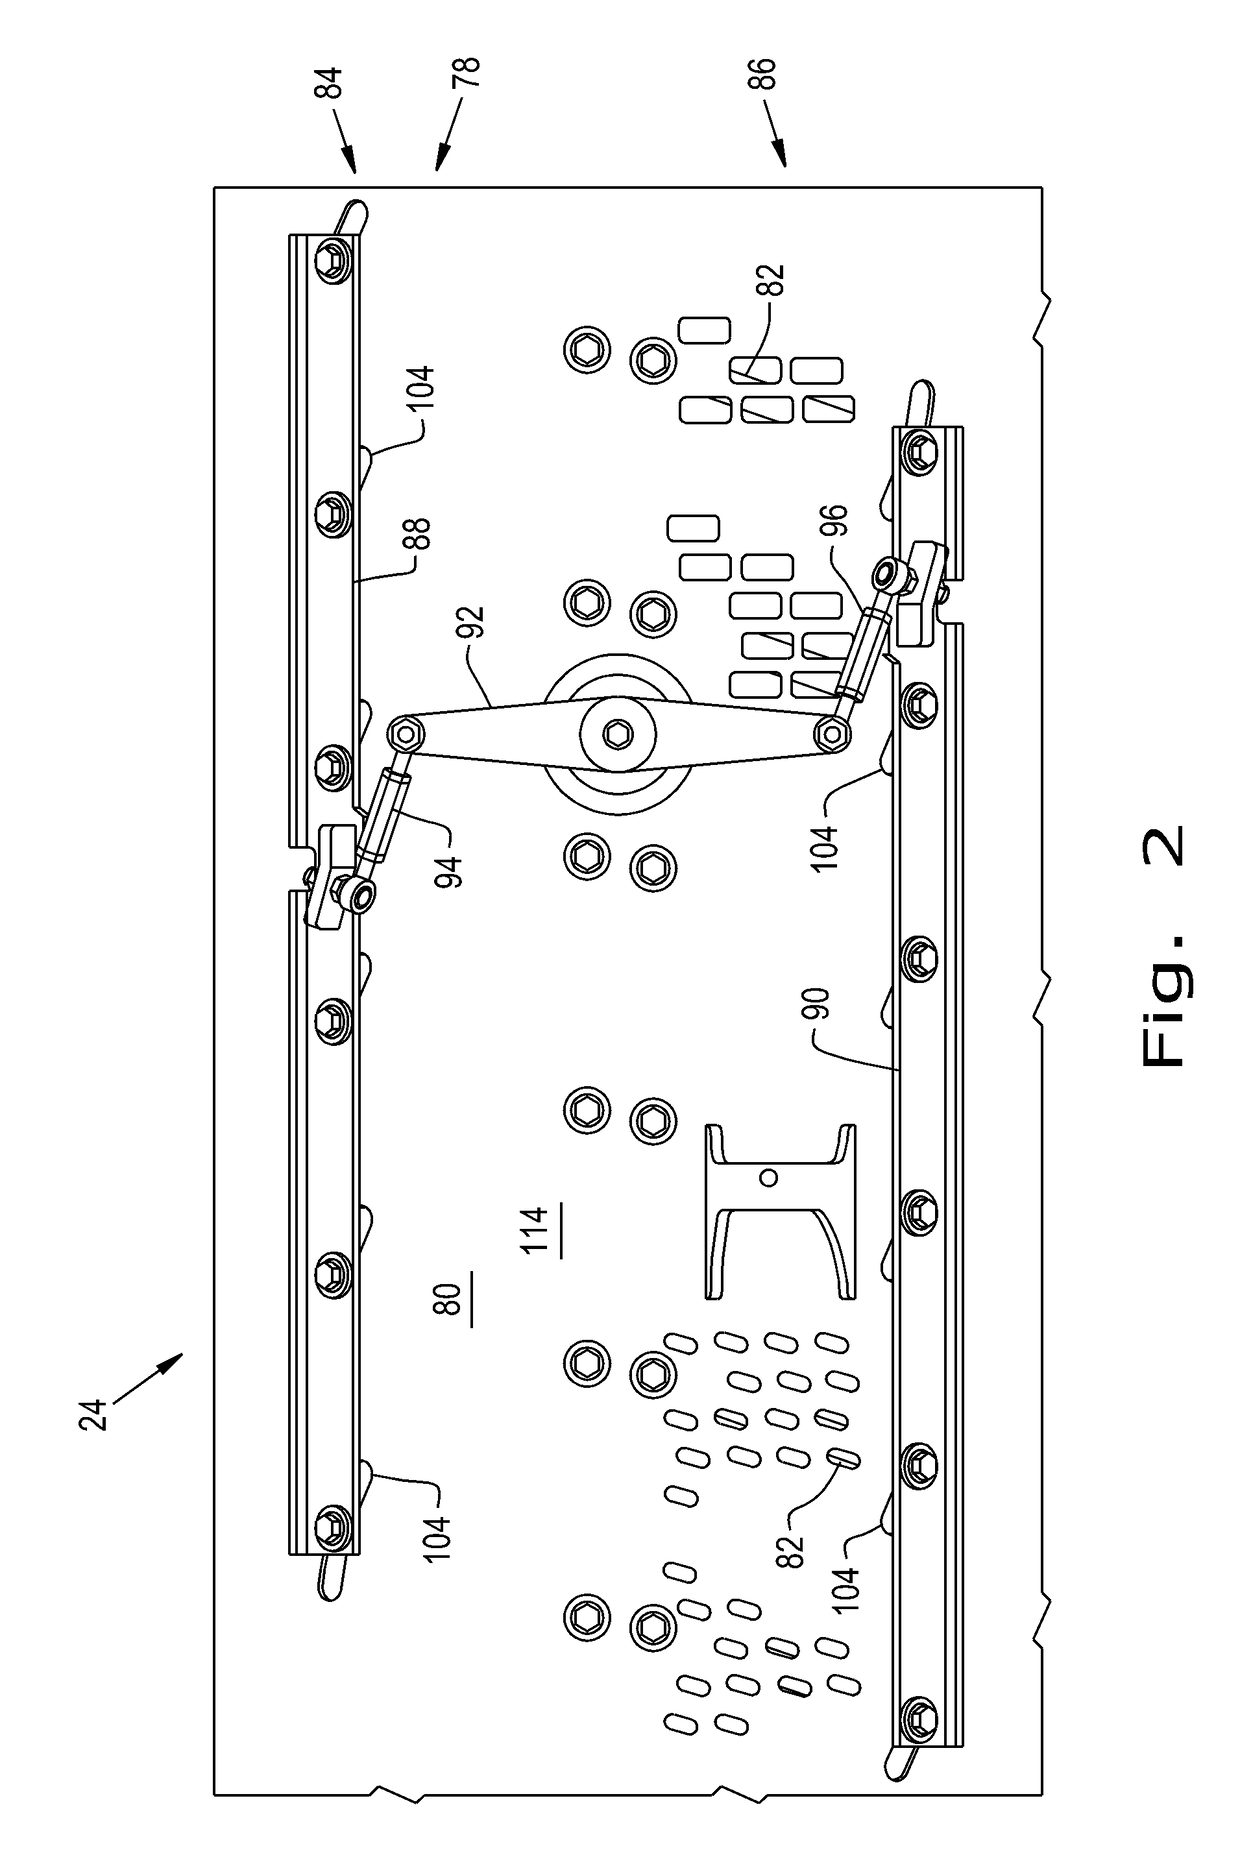 Control system and method for controlling two banks of adjustable vanes on a cylindrical rotor cage of an agricultural harvester